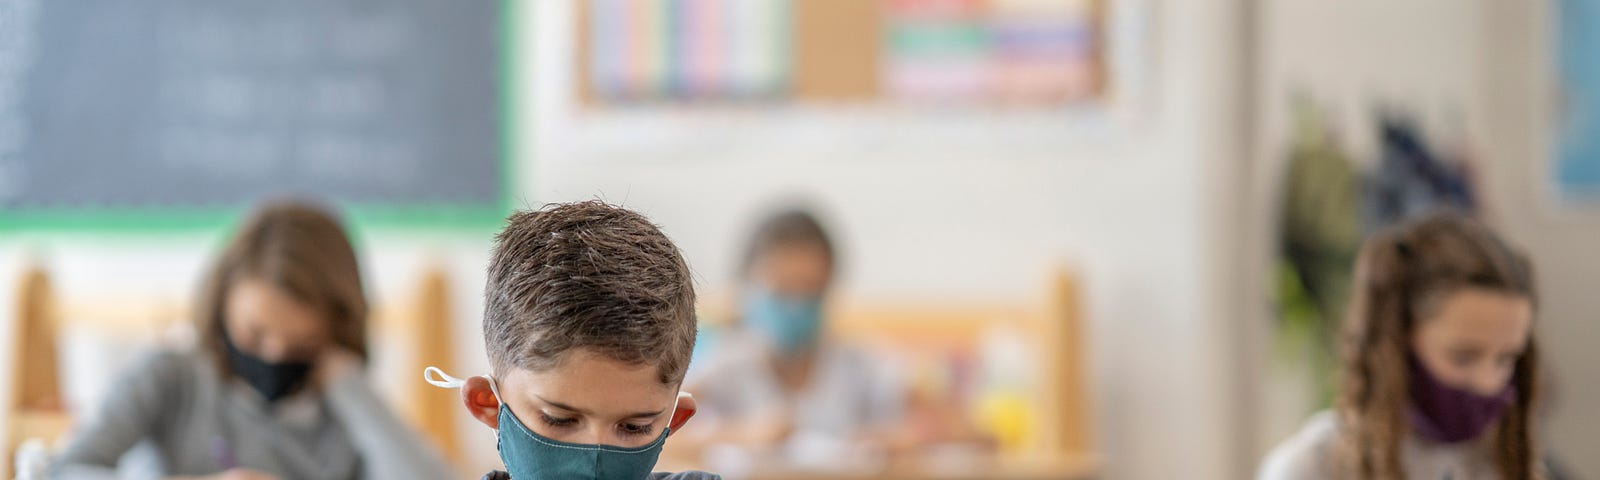 A student wearing a mask works at a school desk.